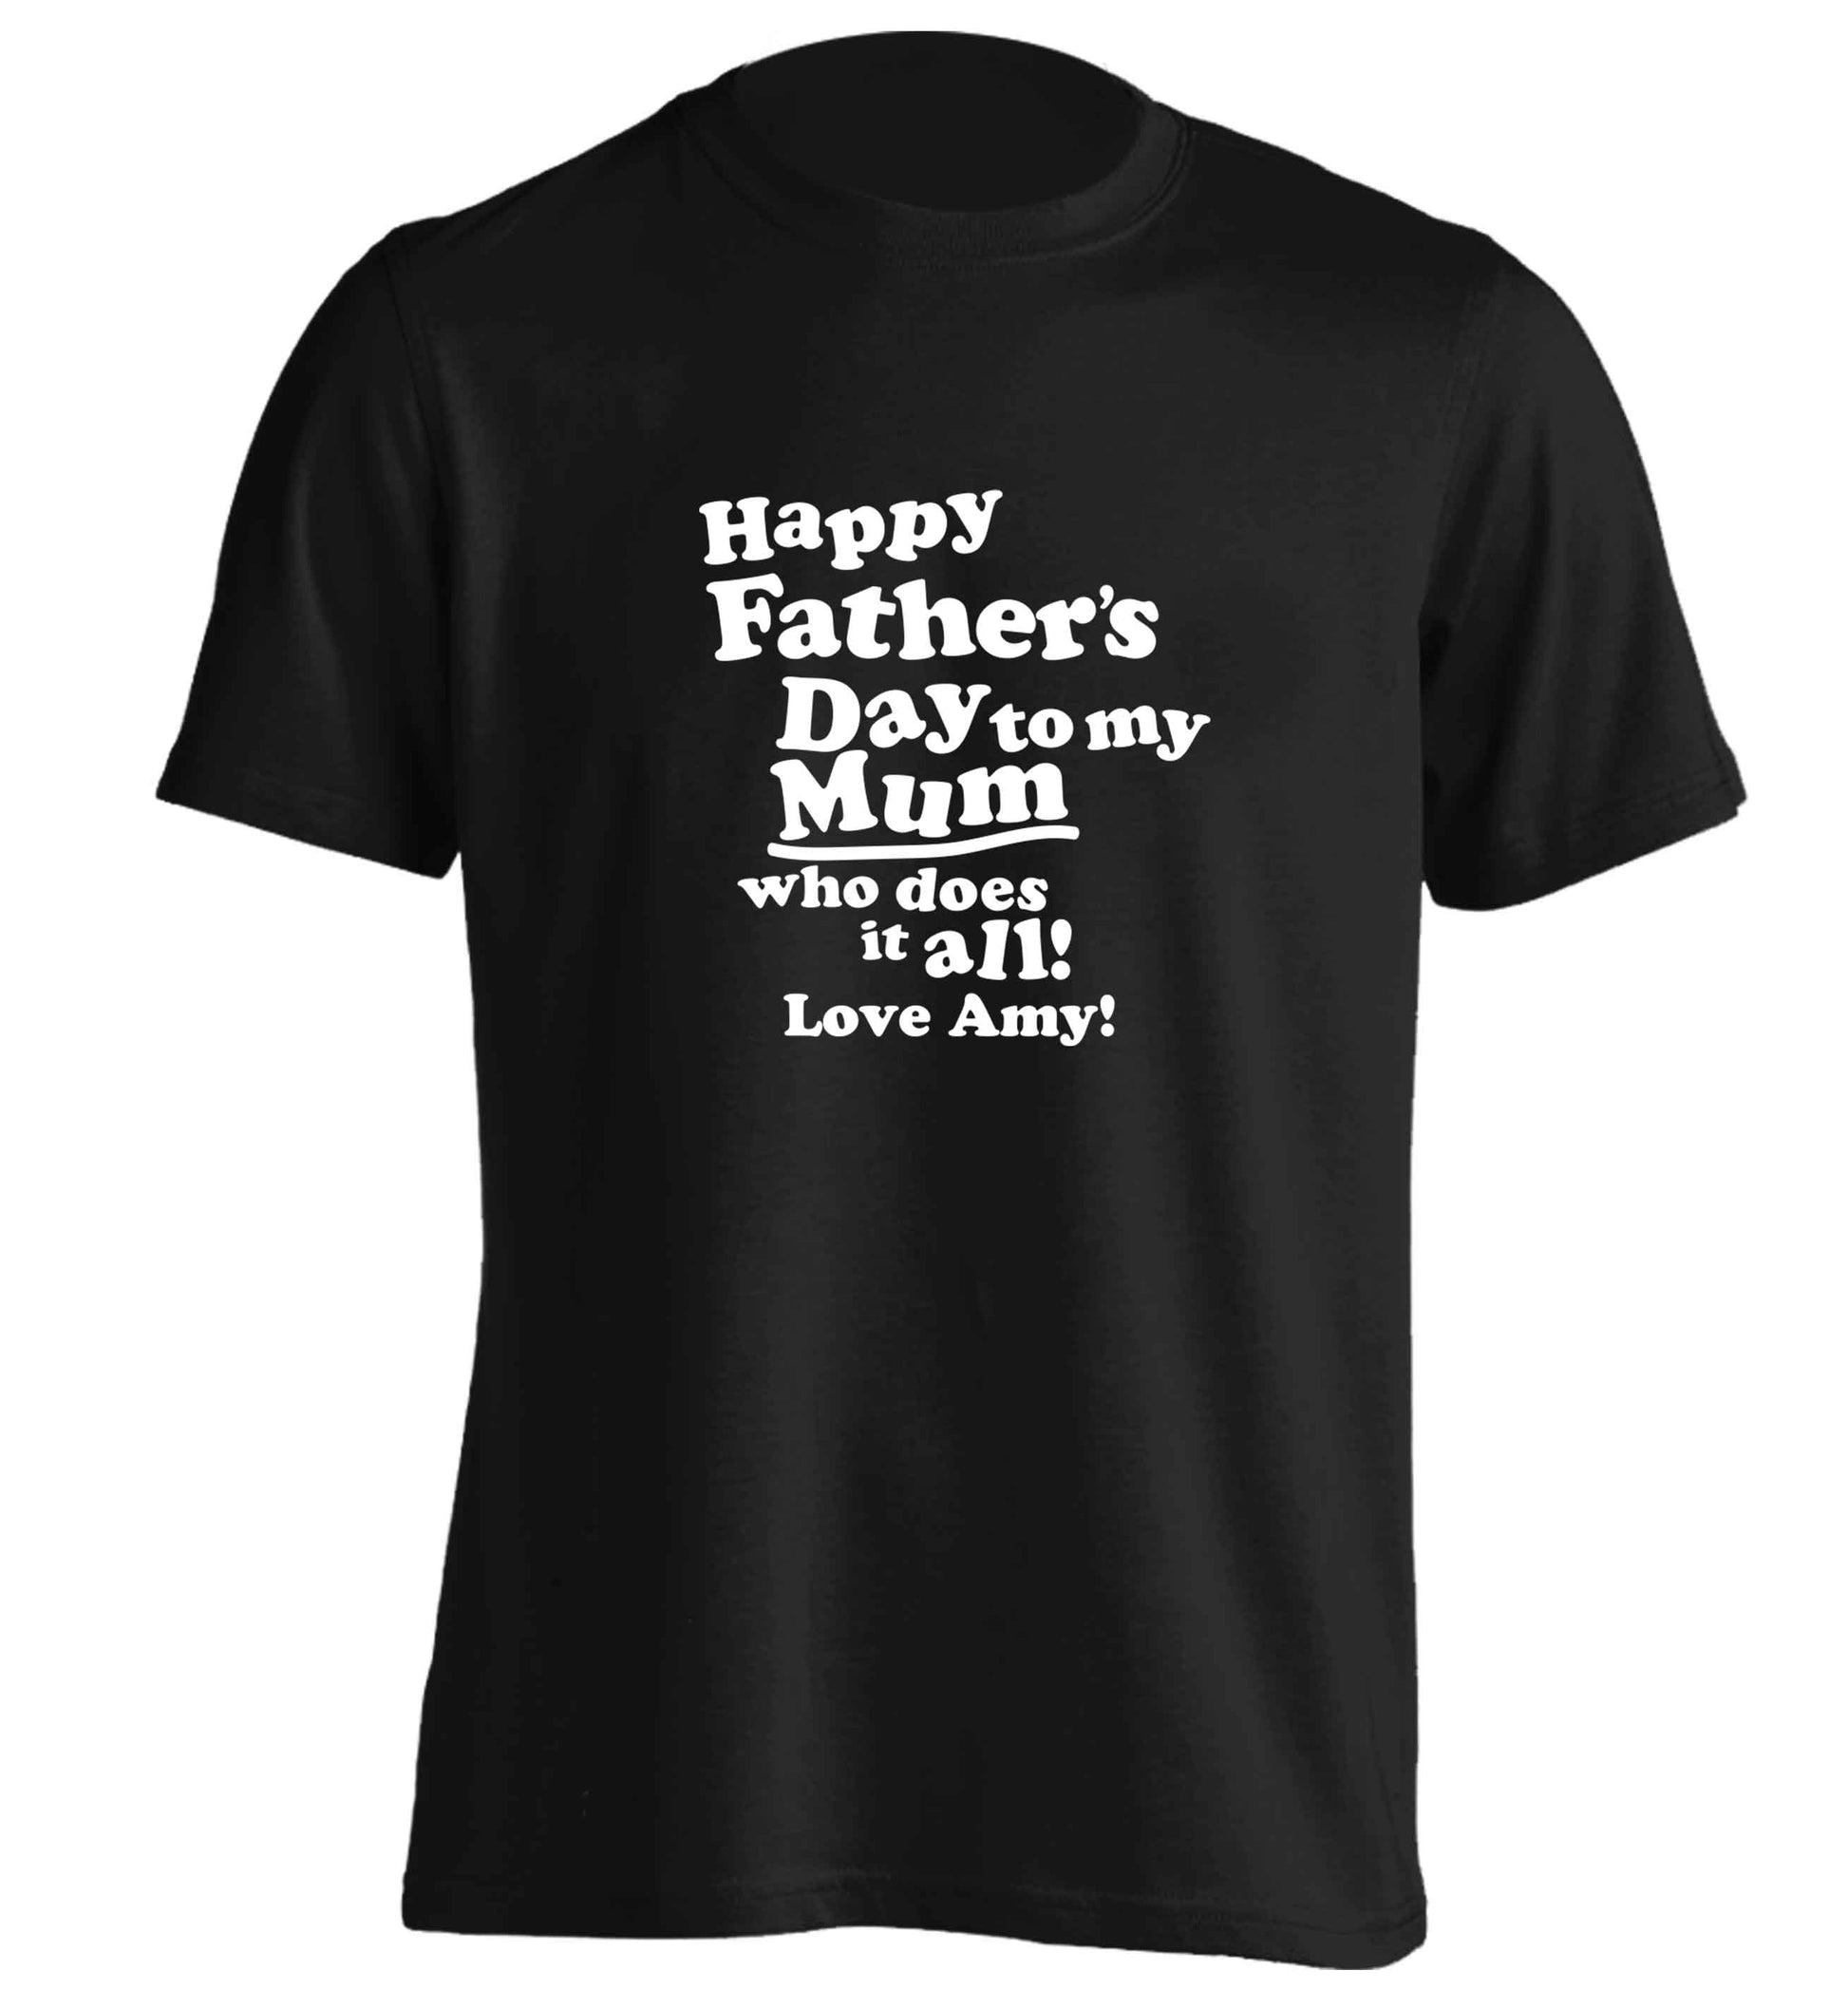 Happy Father's day to my mum who does it all adults unisex black Tshirt 2XL